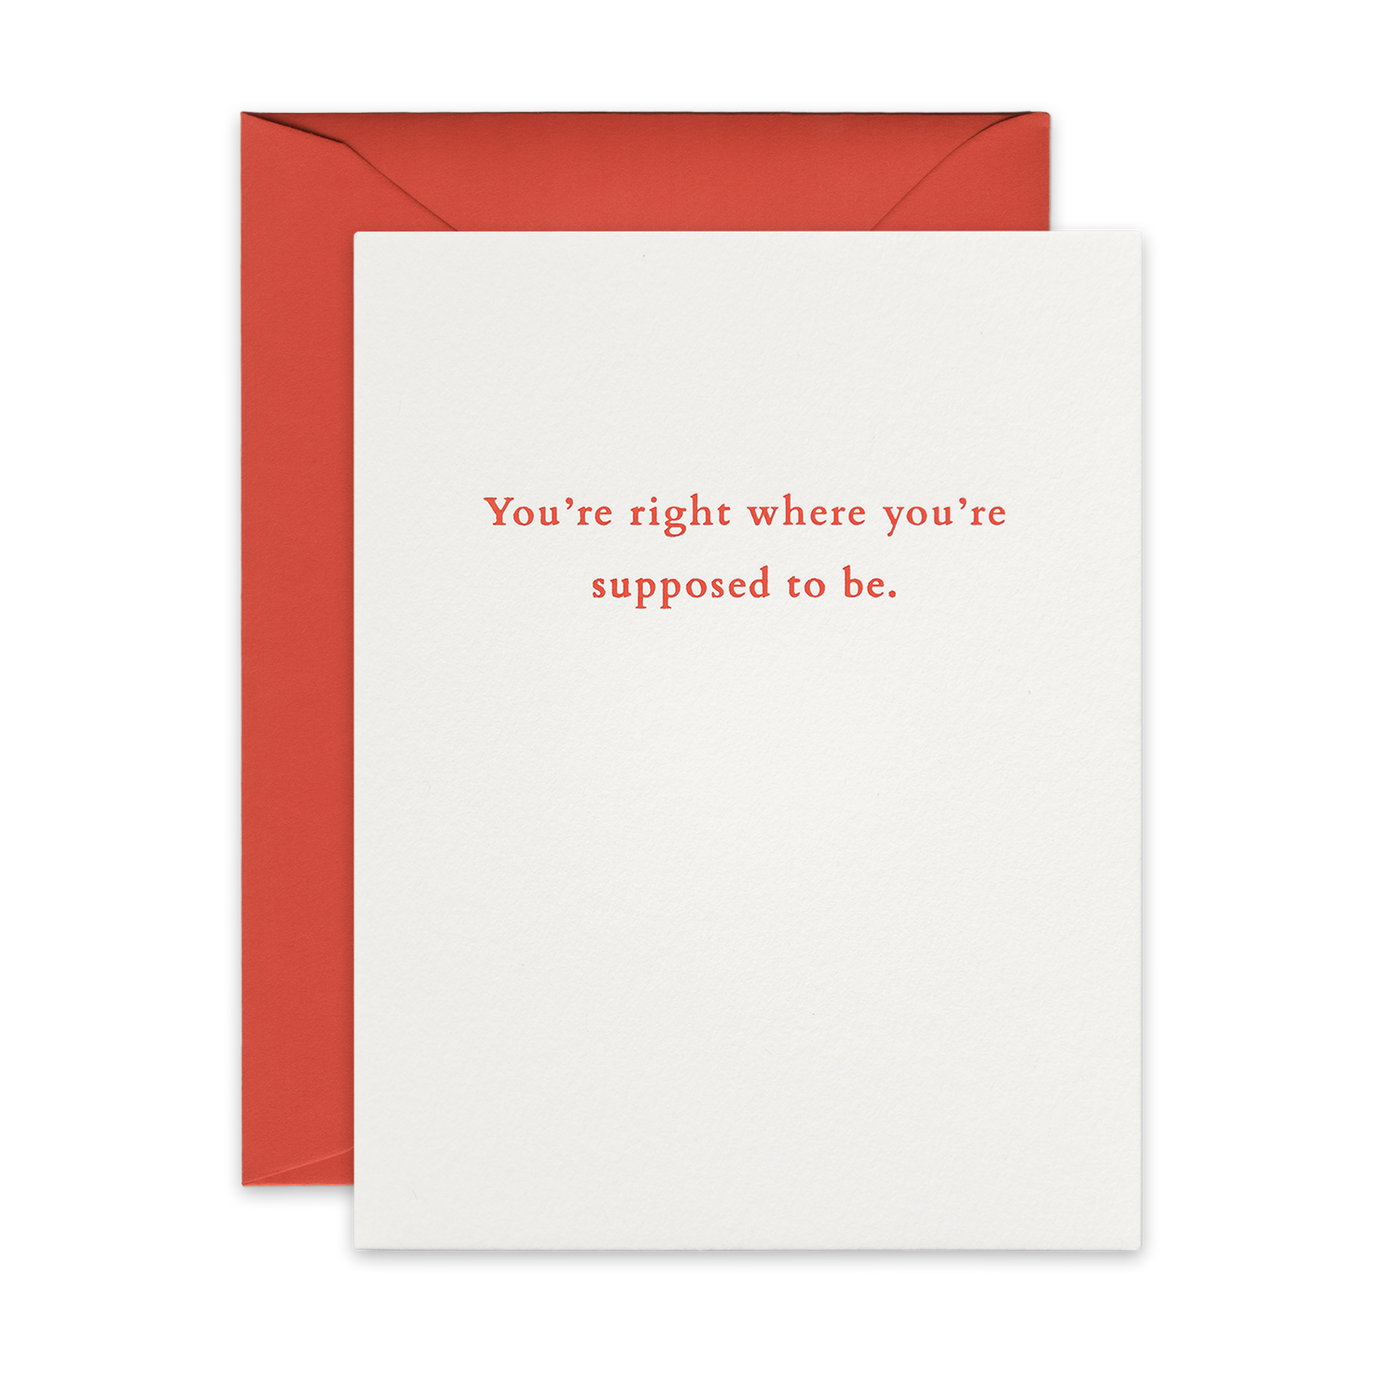 Peach foil letterpress greeting card by beknown. You're right where you're supposed to be.